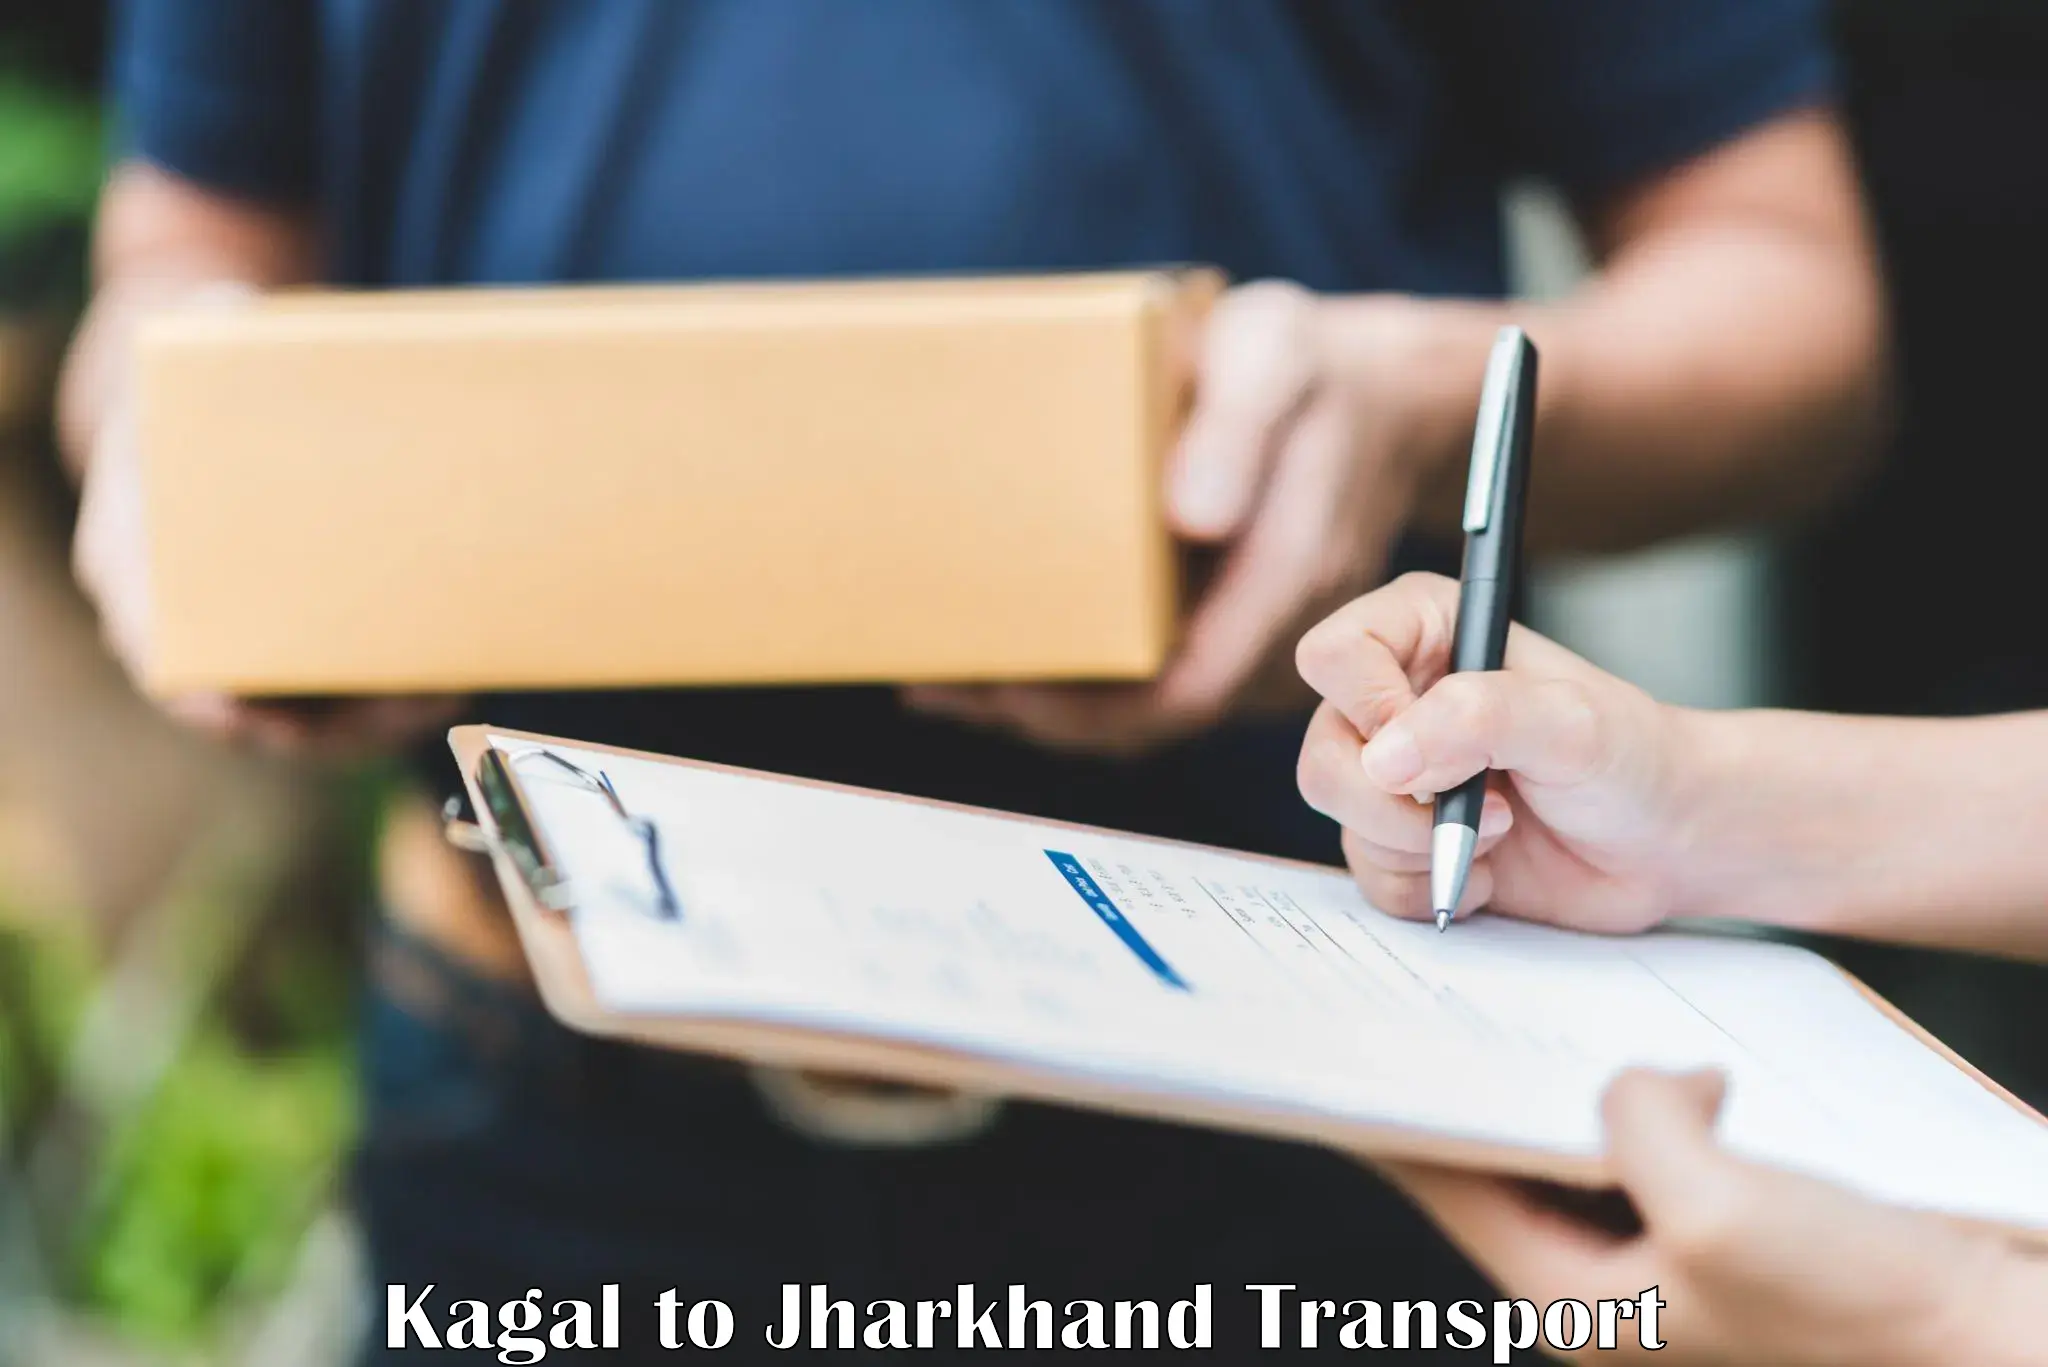 Nearby transport service Kagal to Isri